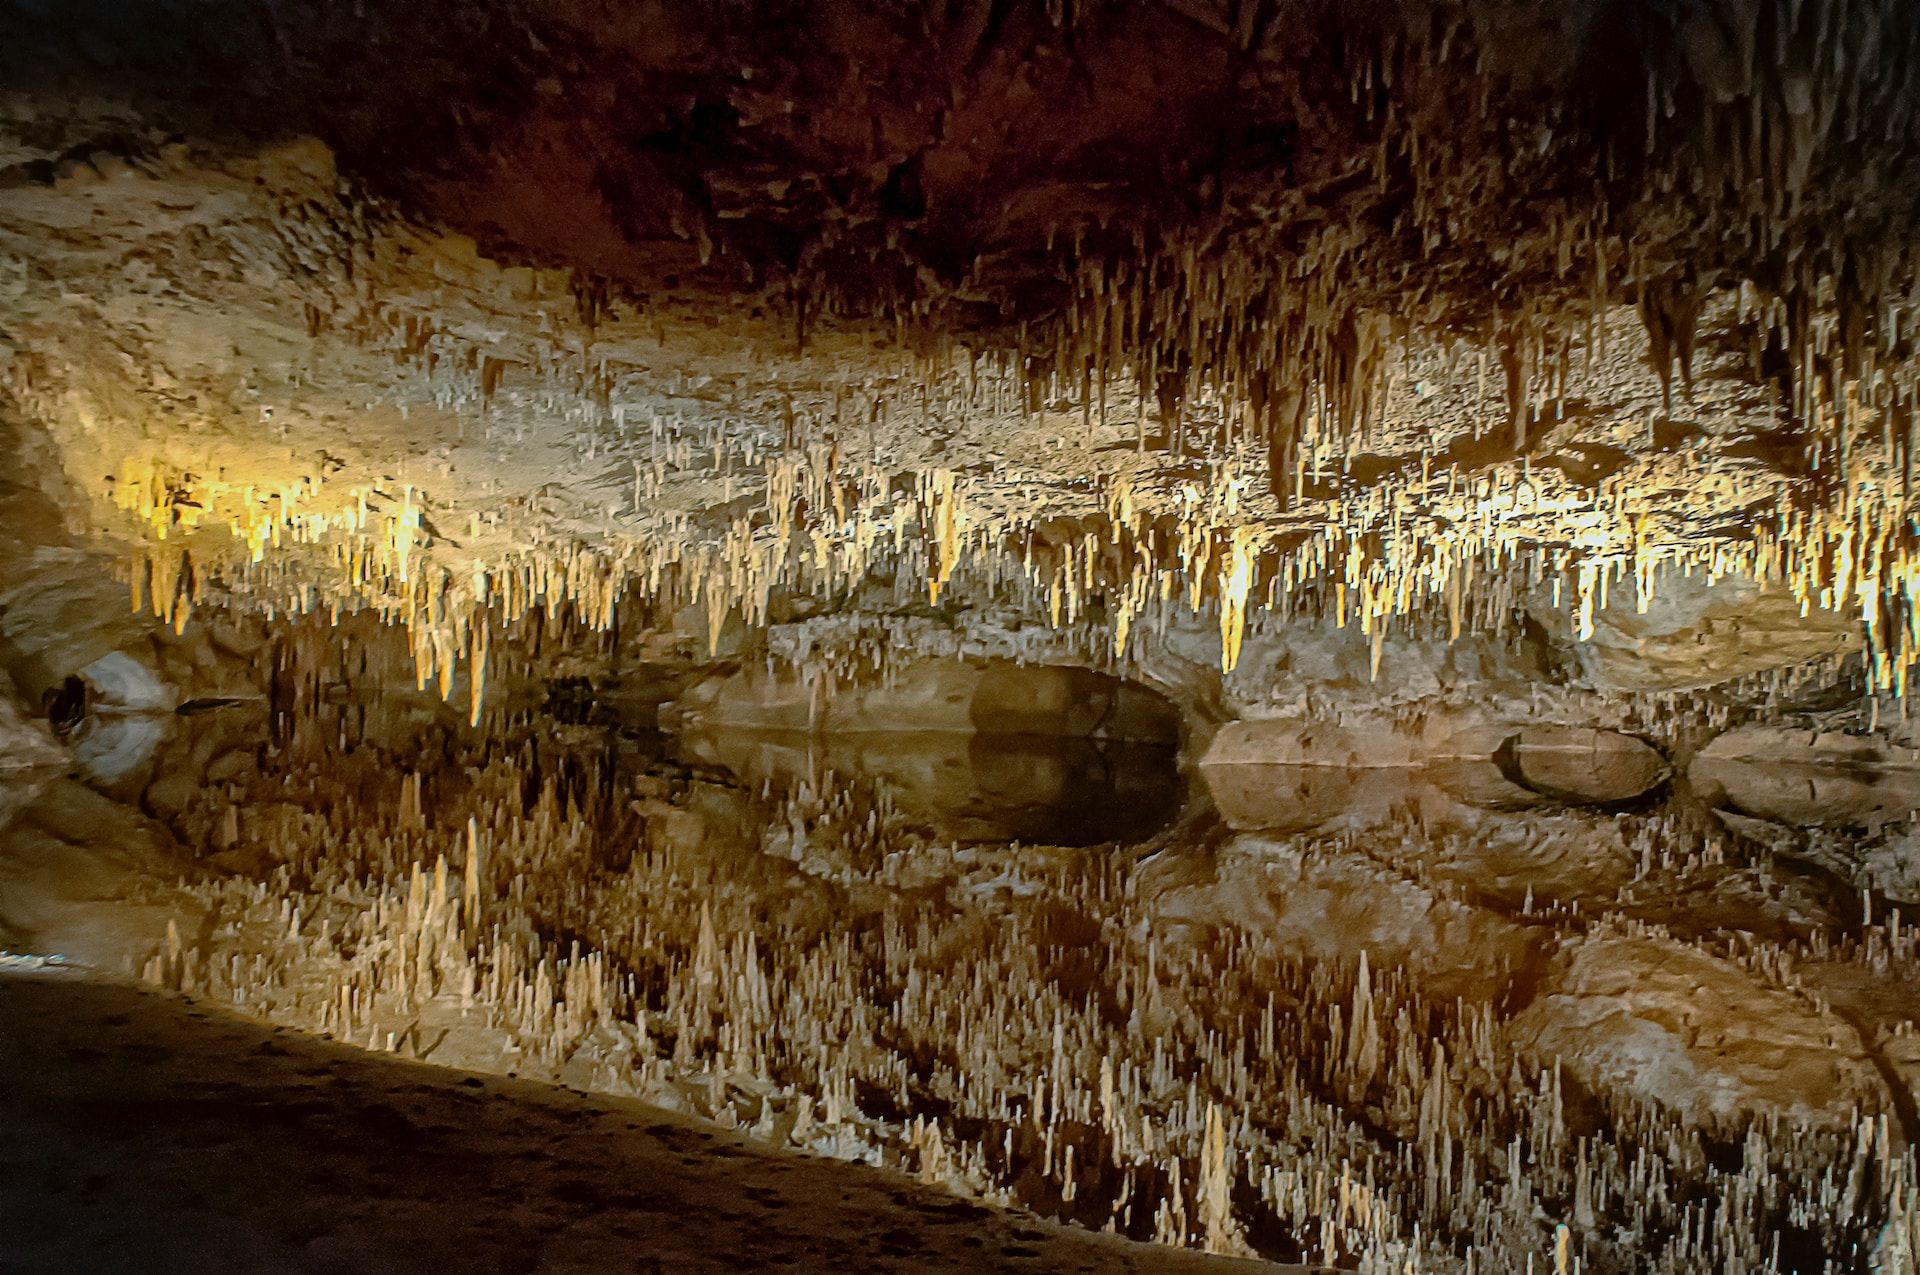 an optical illusion in a reflection, Luray Caverns